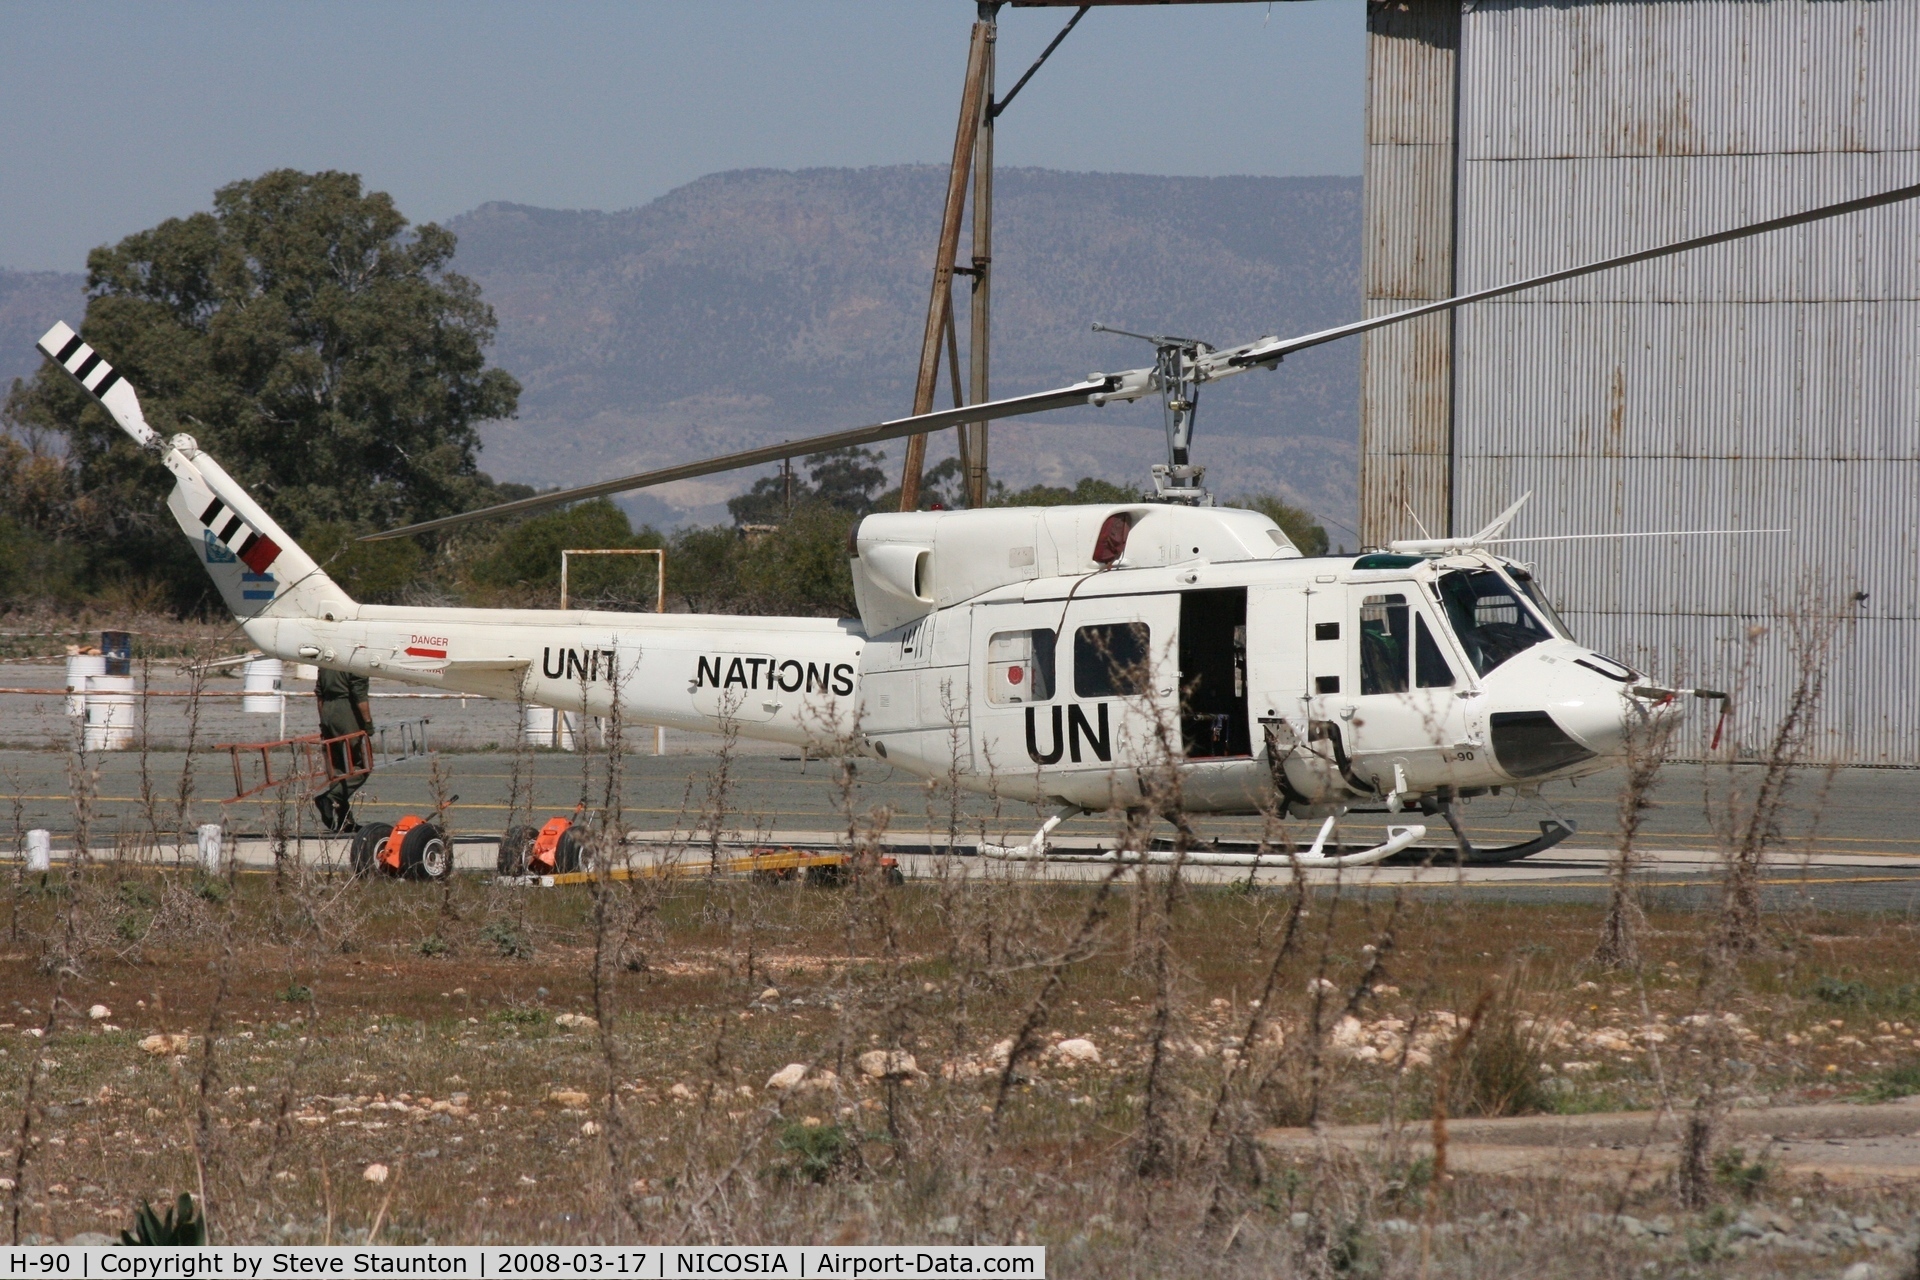 H-90, Bell 212 C/N 32201, Takn at Nicosia Airport, Cyprus. It must be noted that this airport is closed to general visitors.